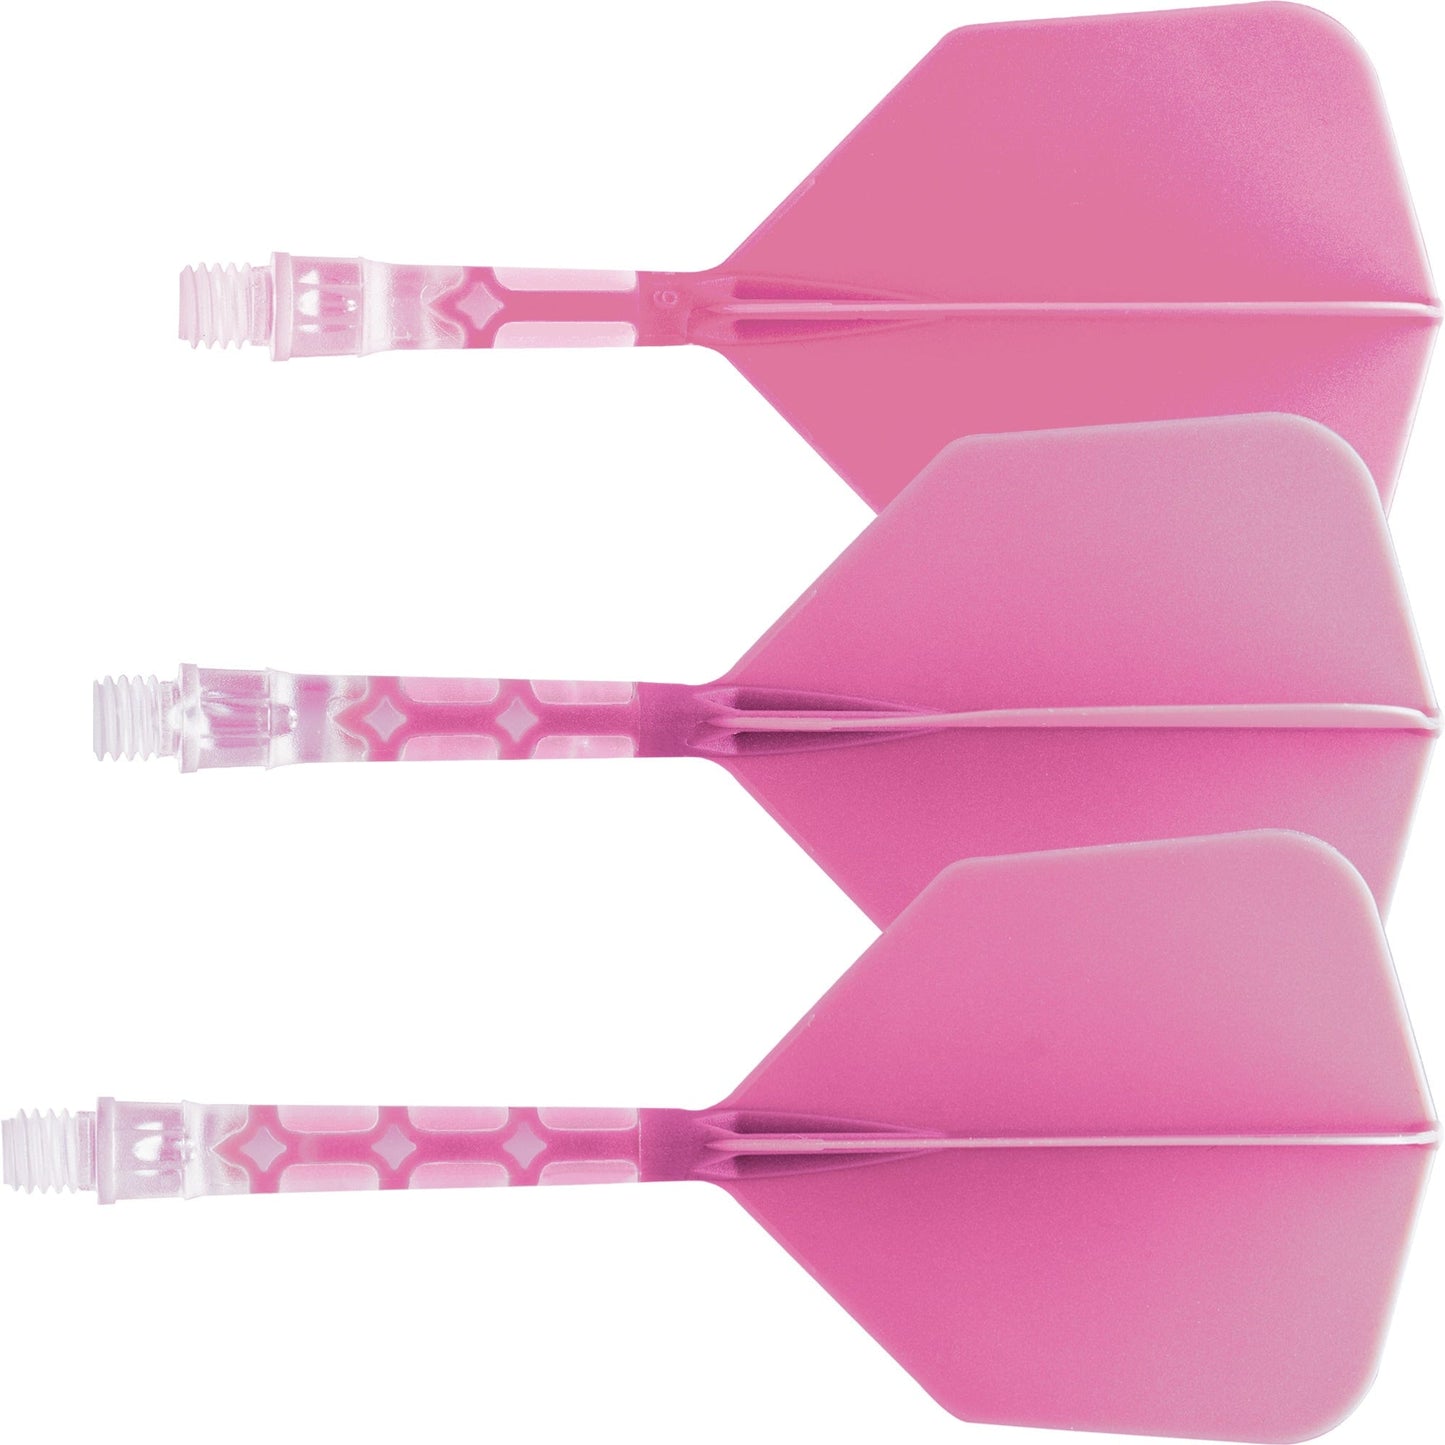 Cuesoul Rost T19 Integrated Dart Shaft and Flights - Big Wing - Clear with Pink Flight